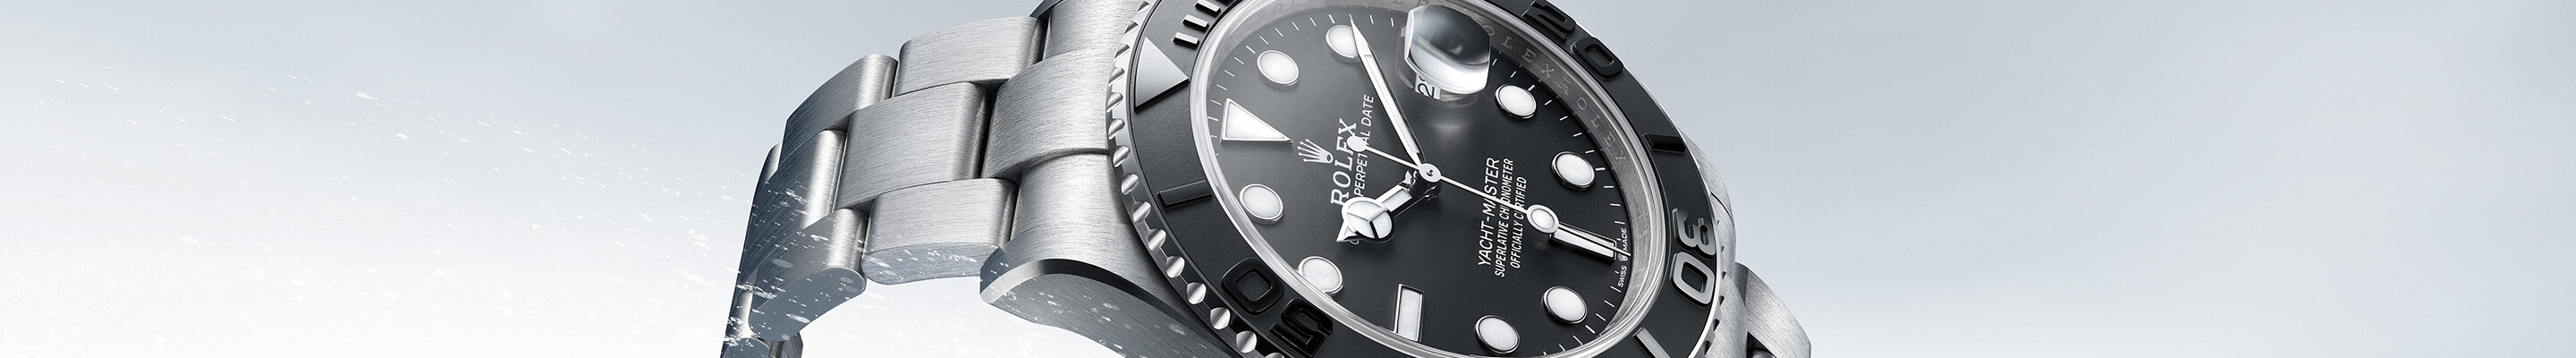 ROLEX YACHT-MASTER at ACRE